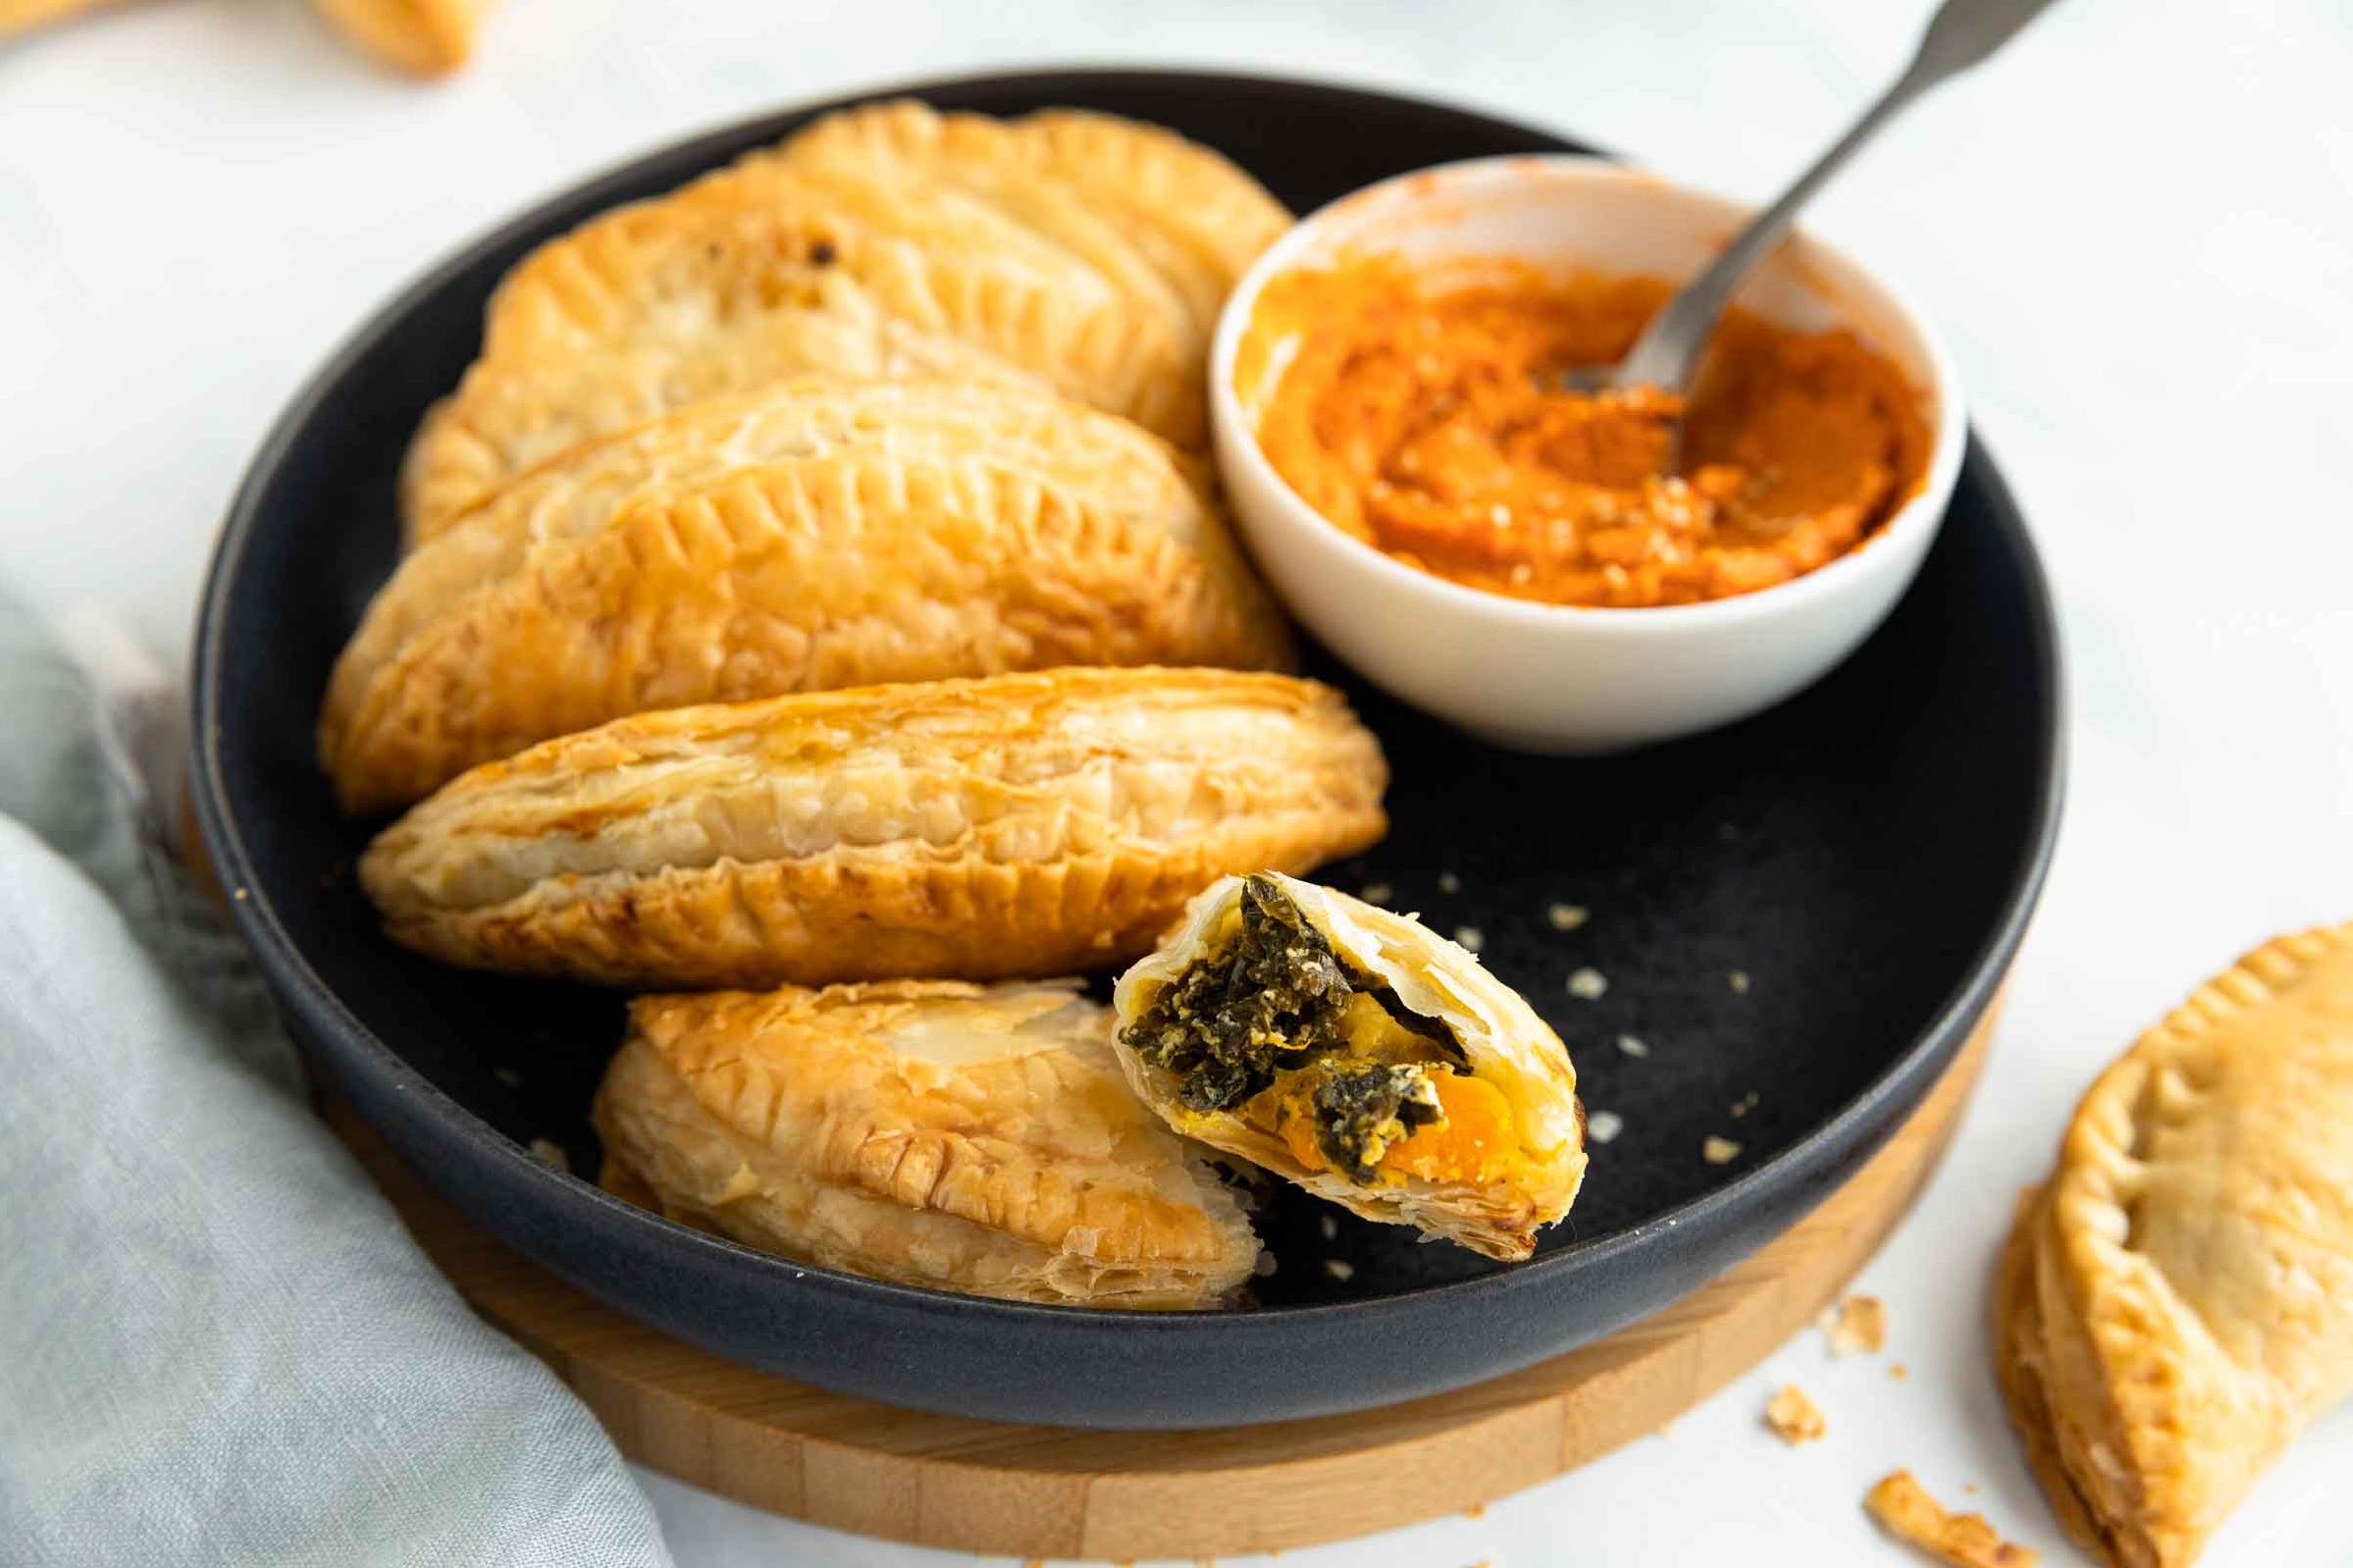  Each bite of these empanadas is bursting with flavorful goodness!